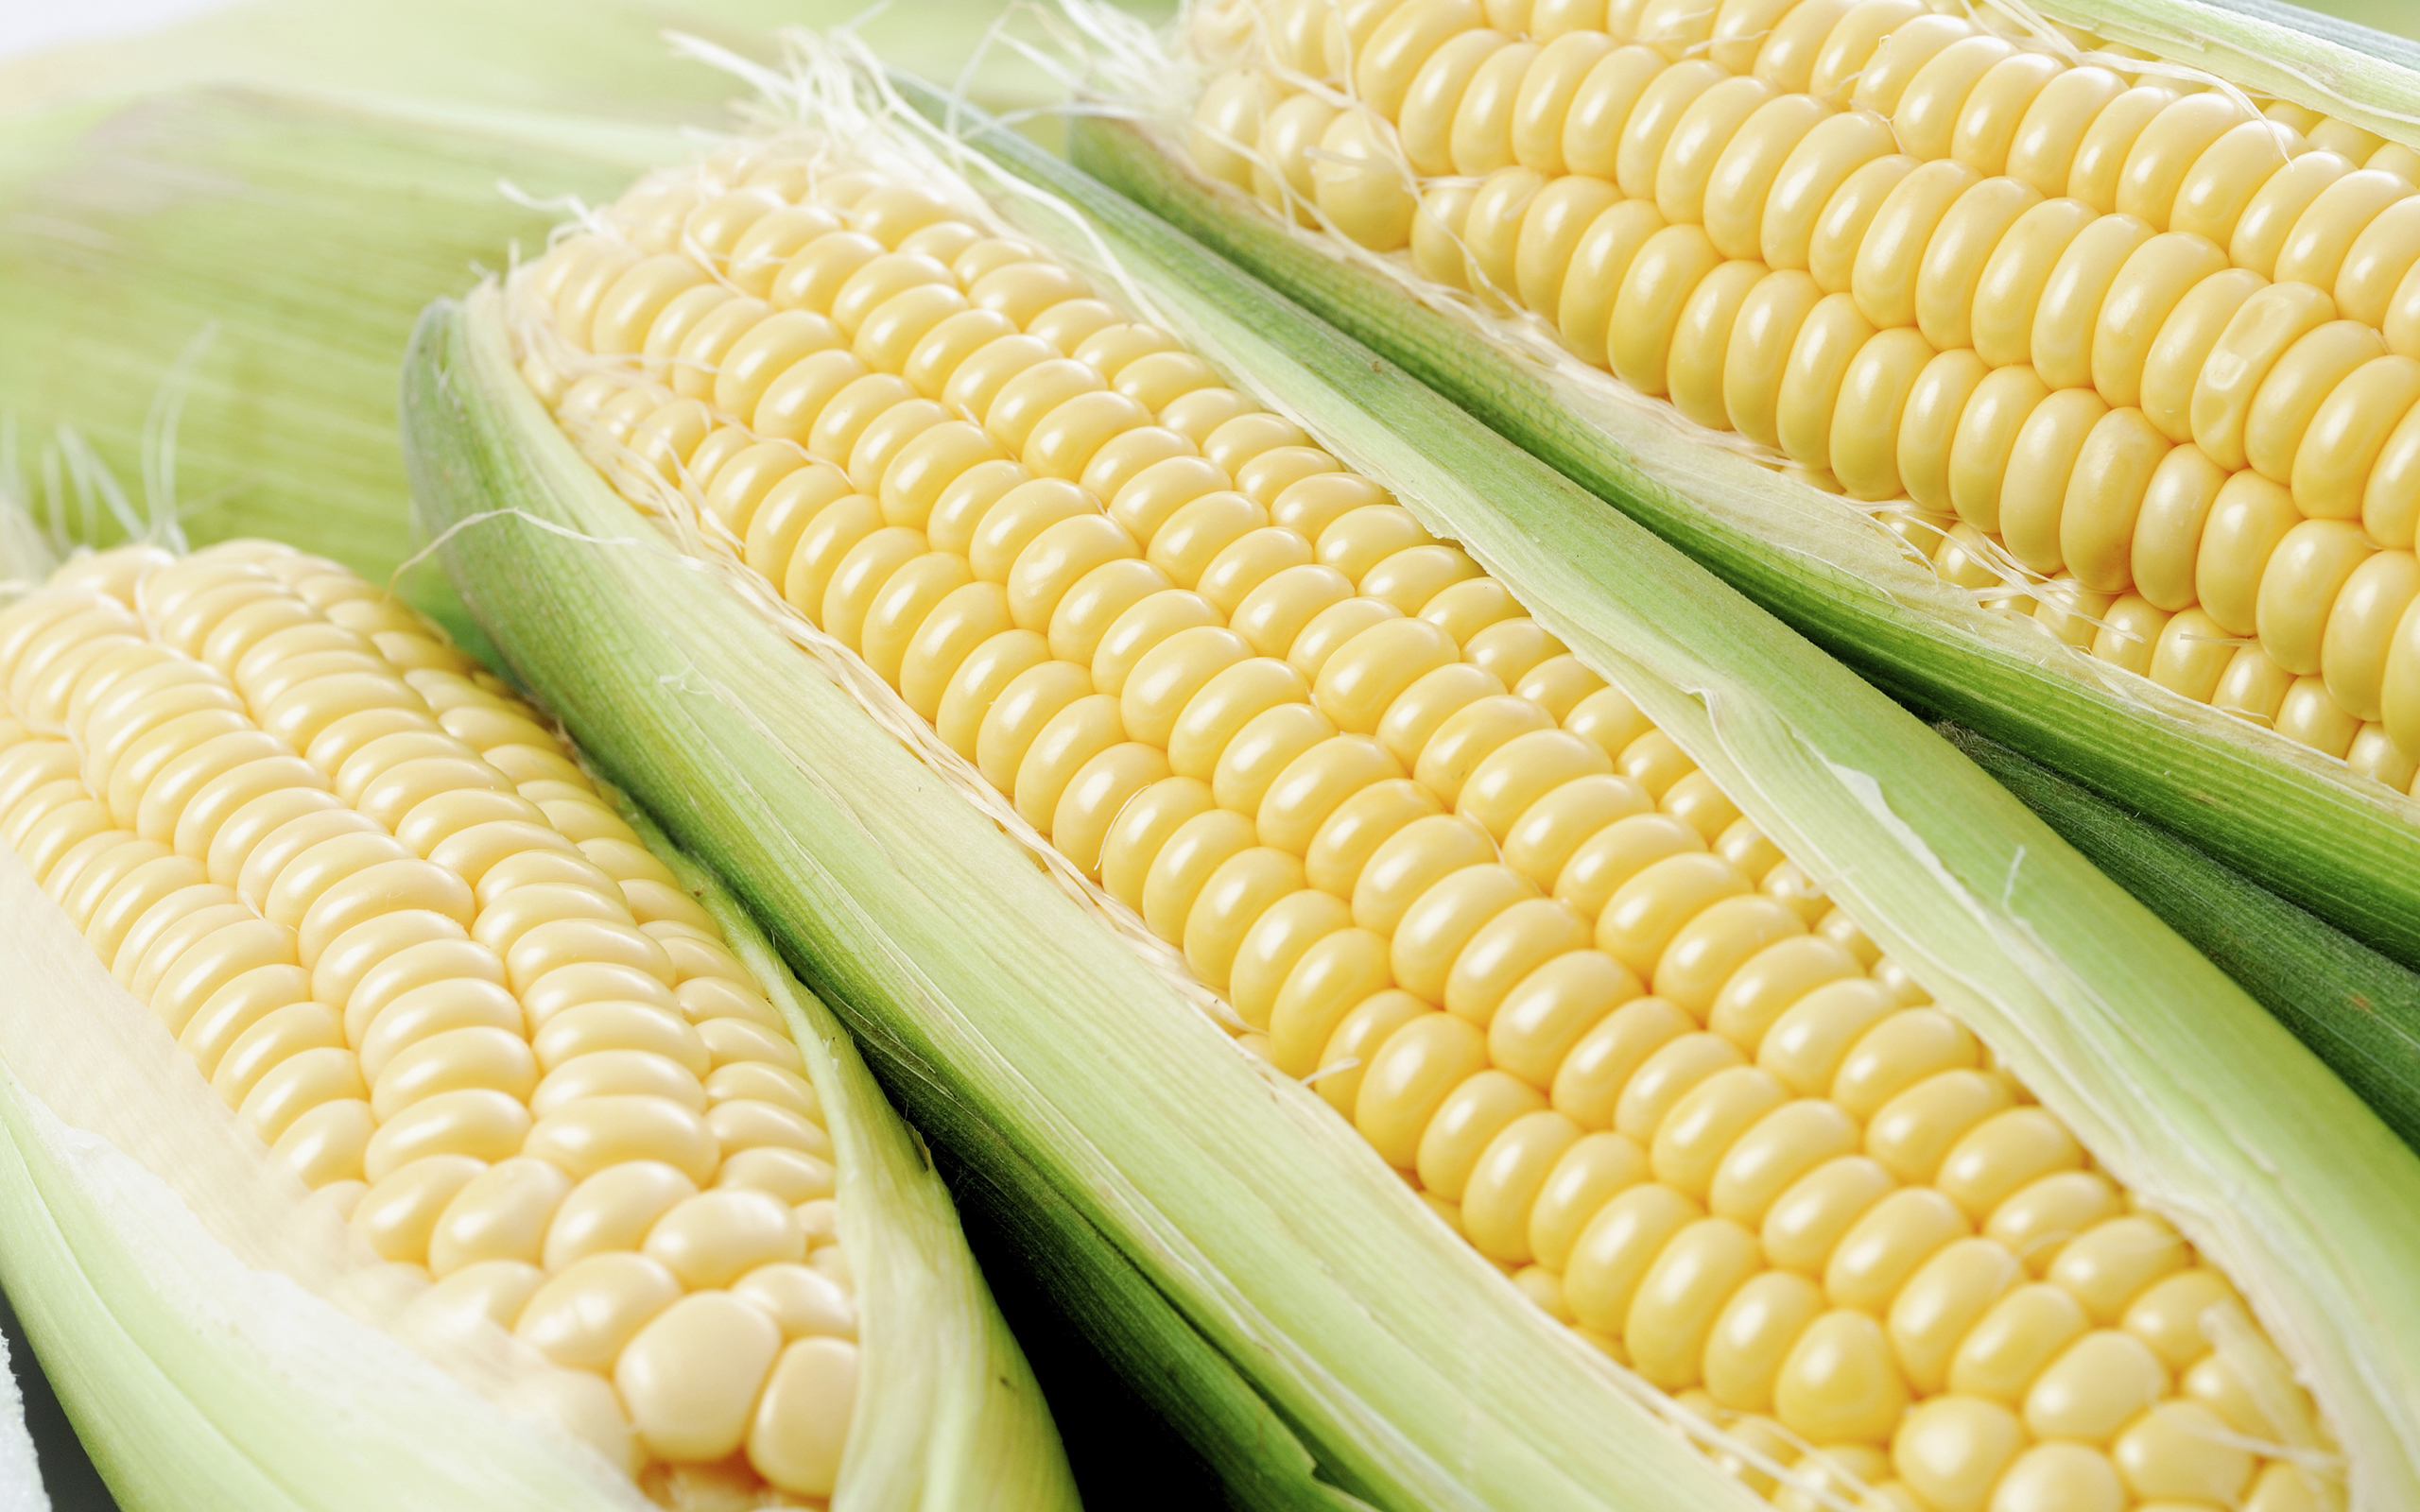 Top HDQ Cute Corn Image, Wallpaper MDV91 Collection